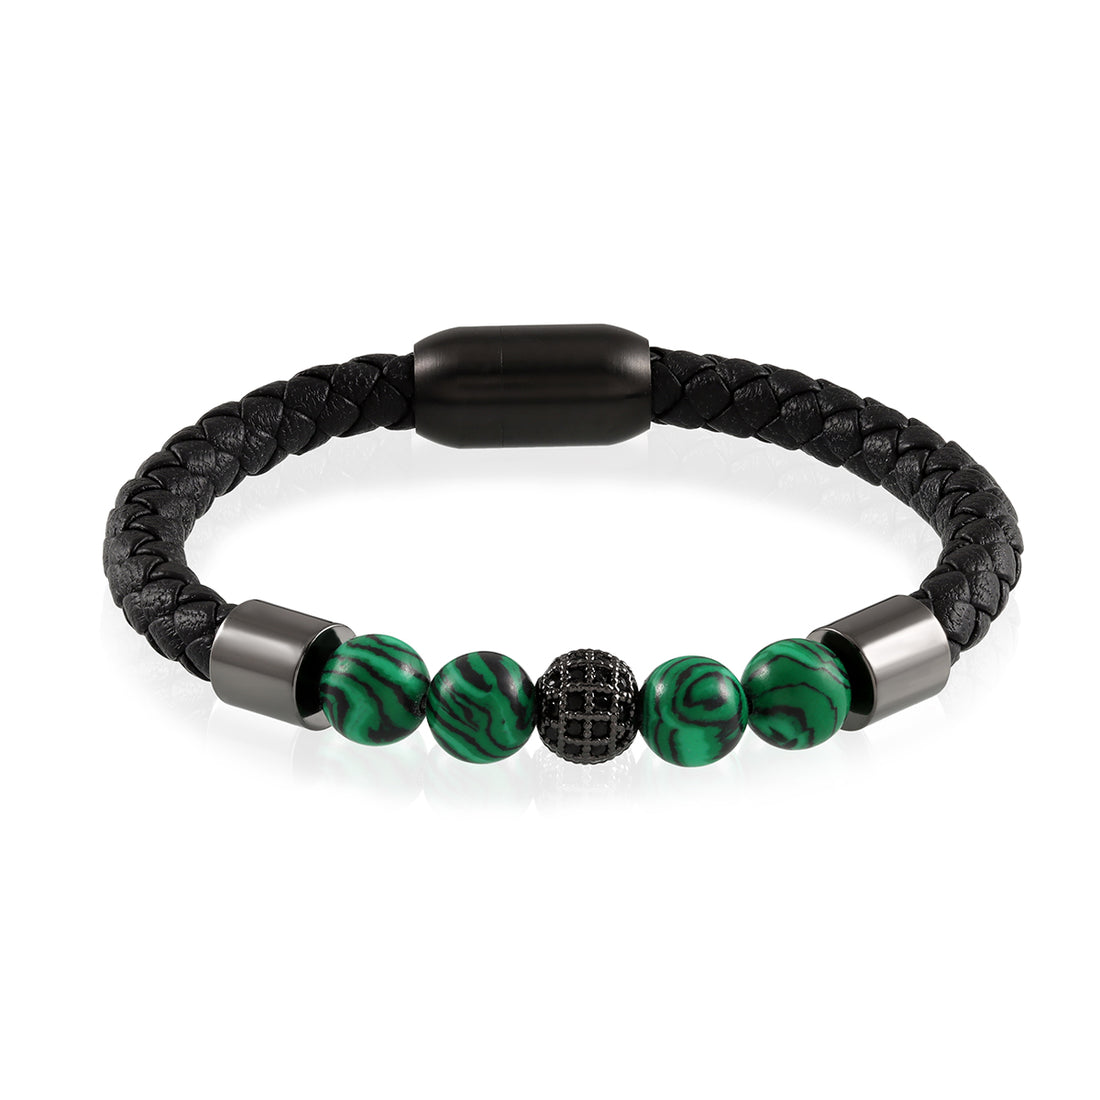 Black Onyx and Black Spinel Leather Bracelet with Magnetic Lock